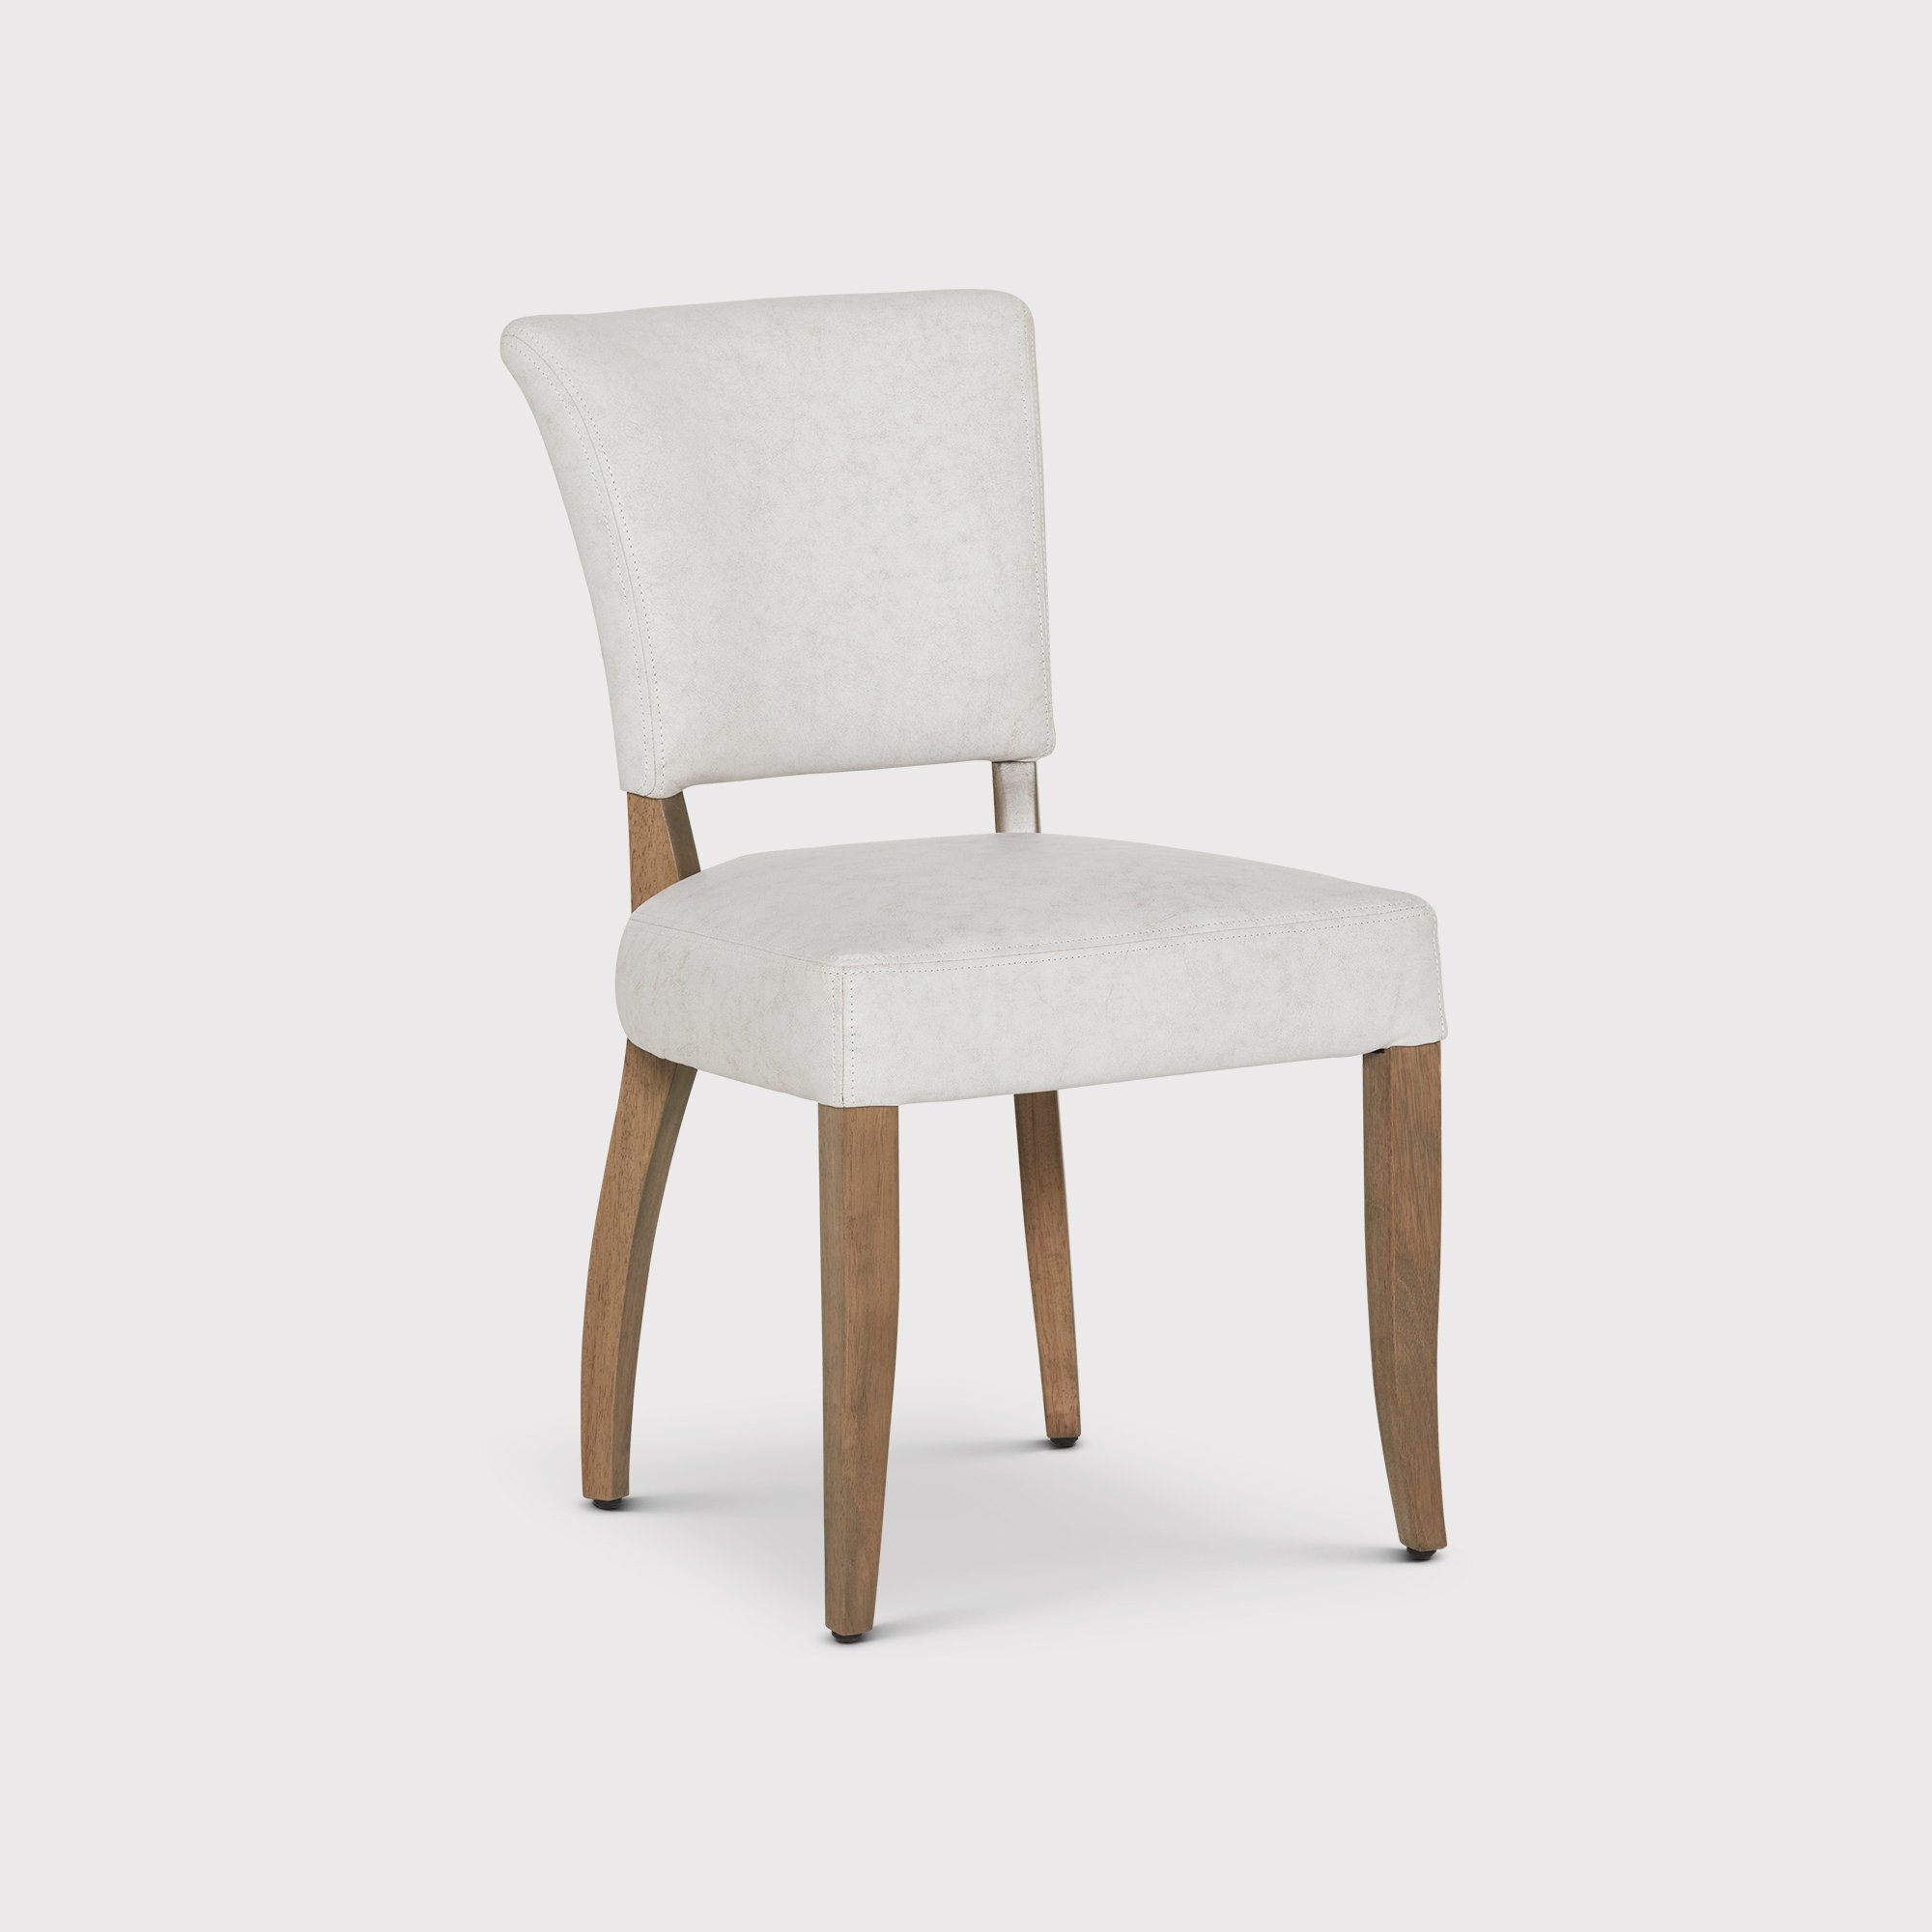 Timothy Oulton Mimi Dining Chair, White | Barker & Stonehouse